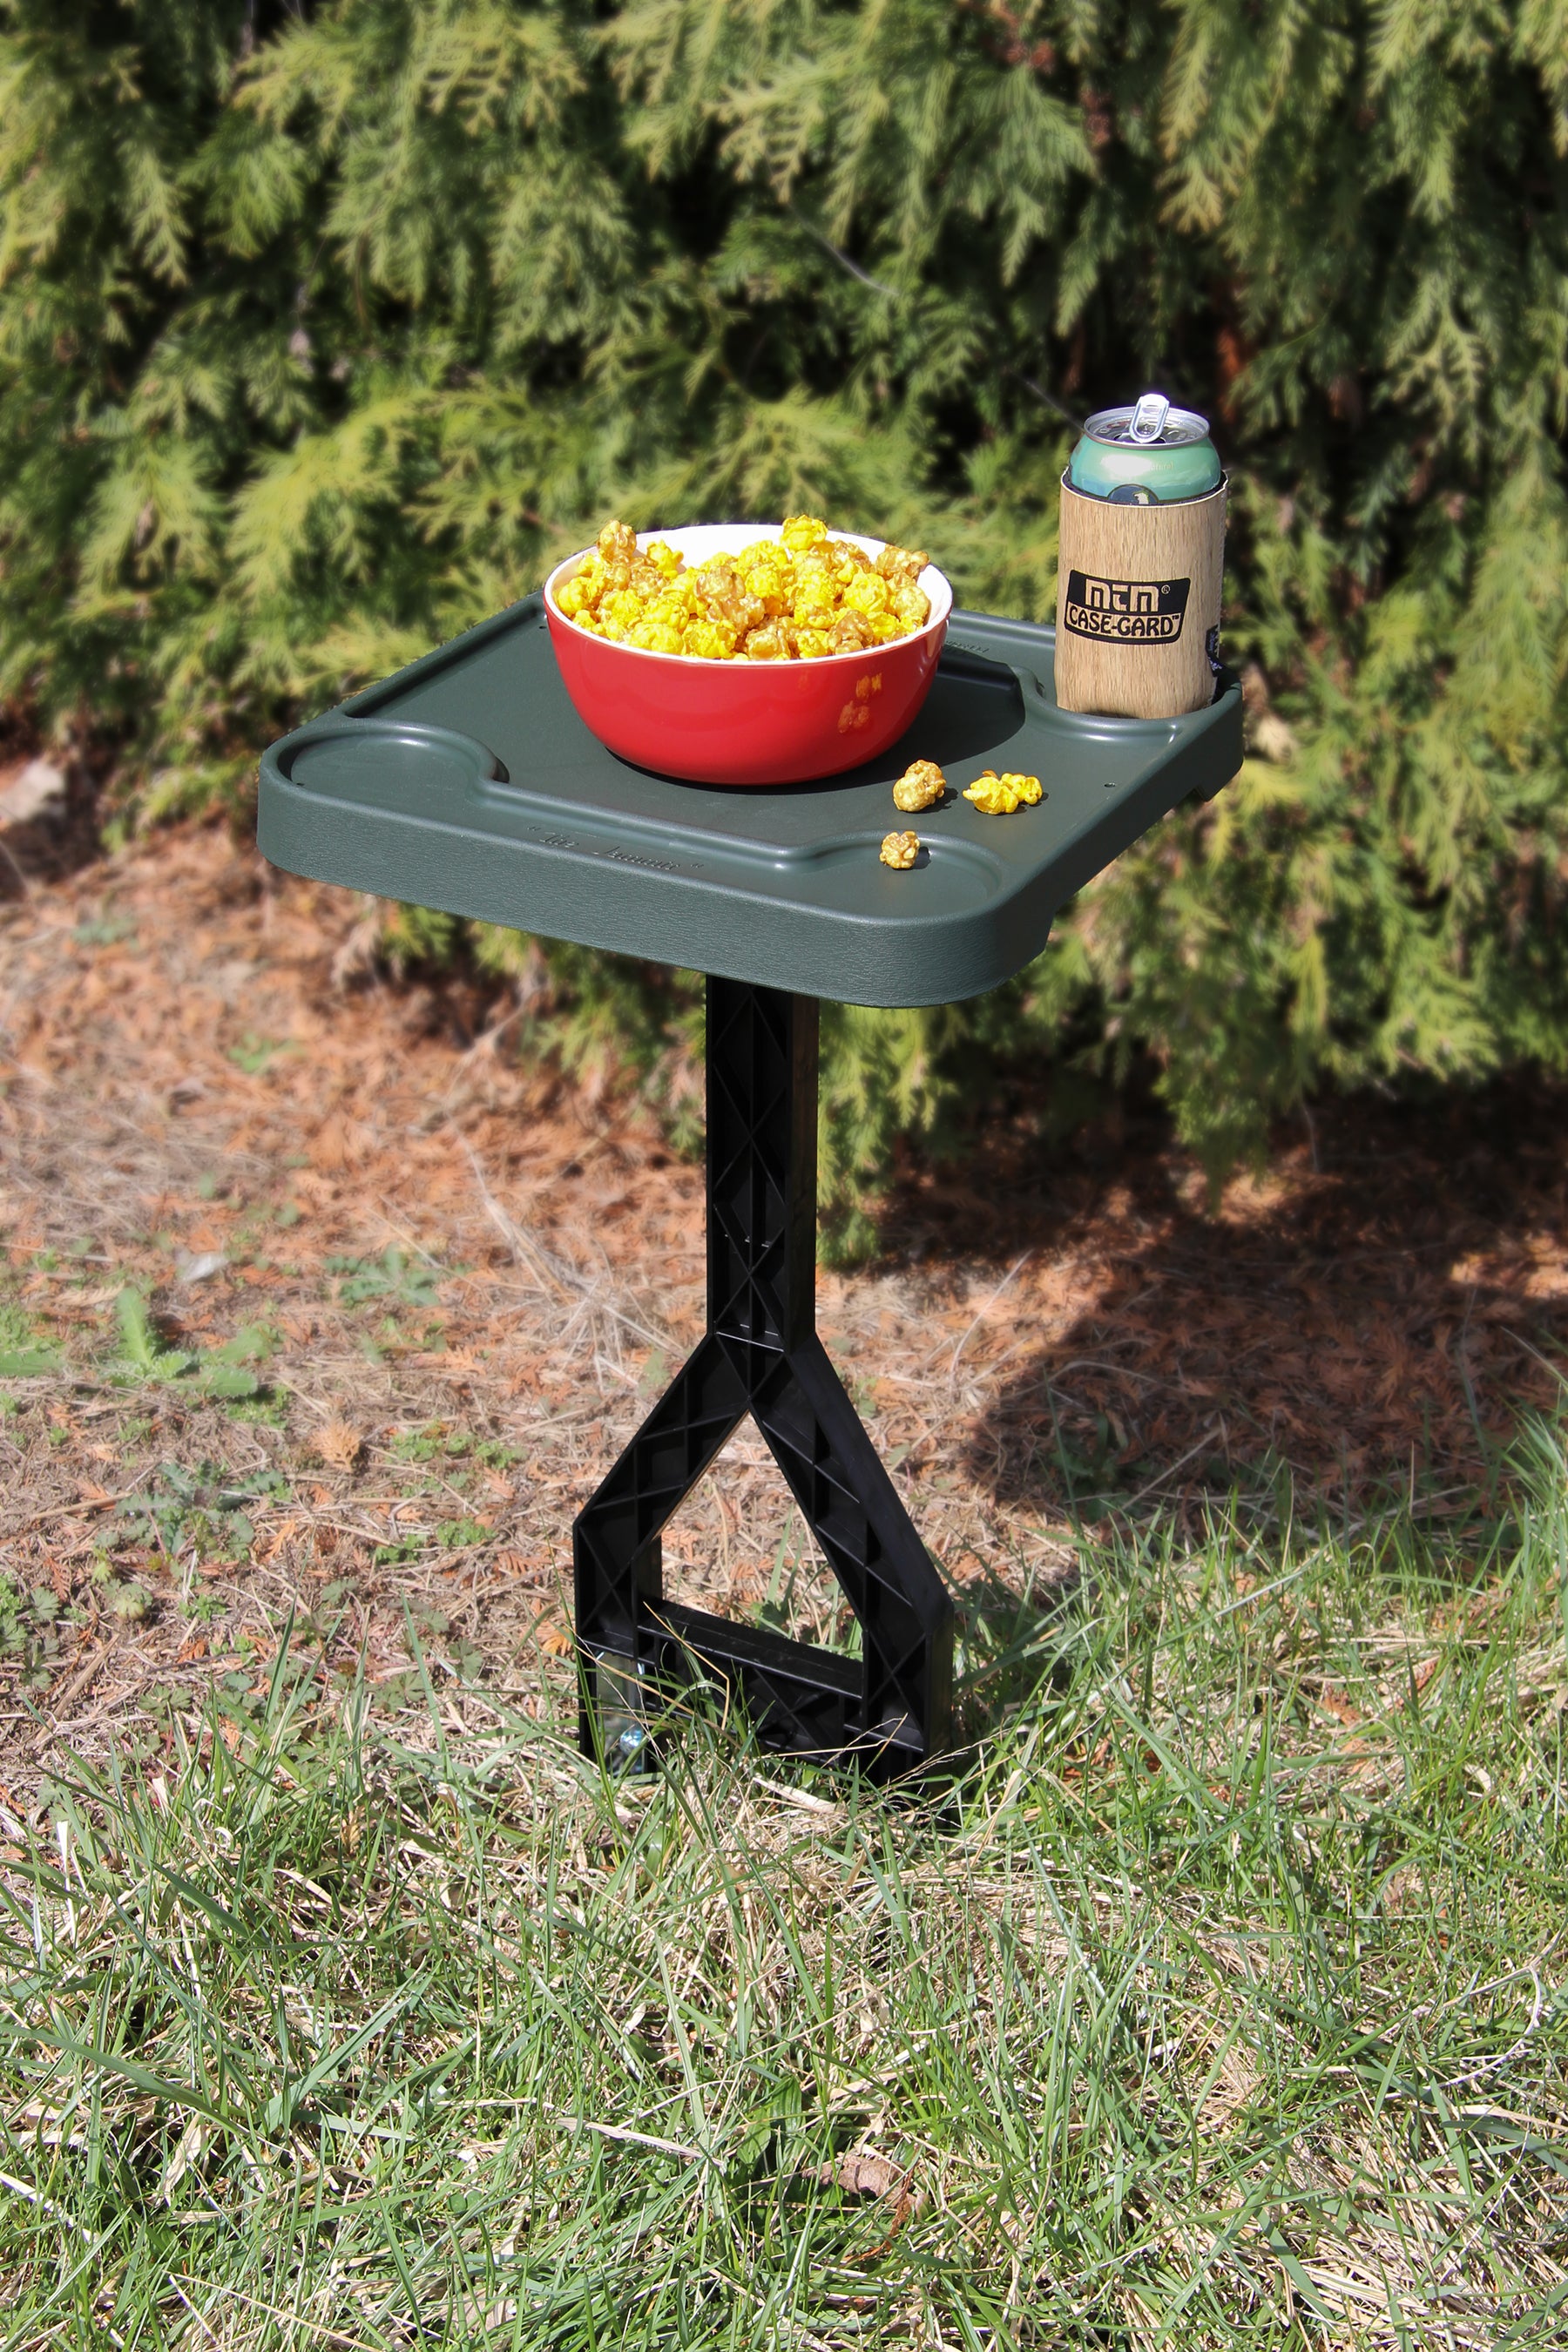 JM-1-11 - Jammit Personal Outdoor Table for Cookouts Barbeques Sports